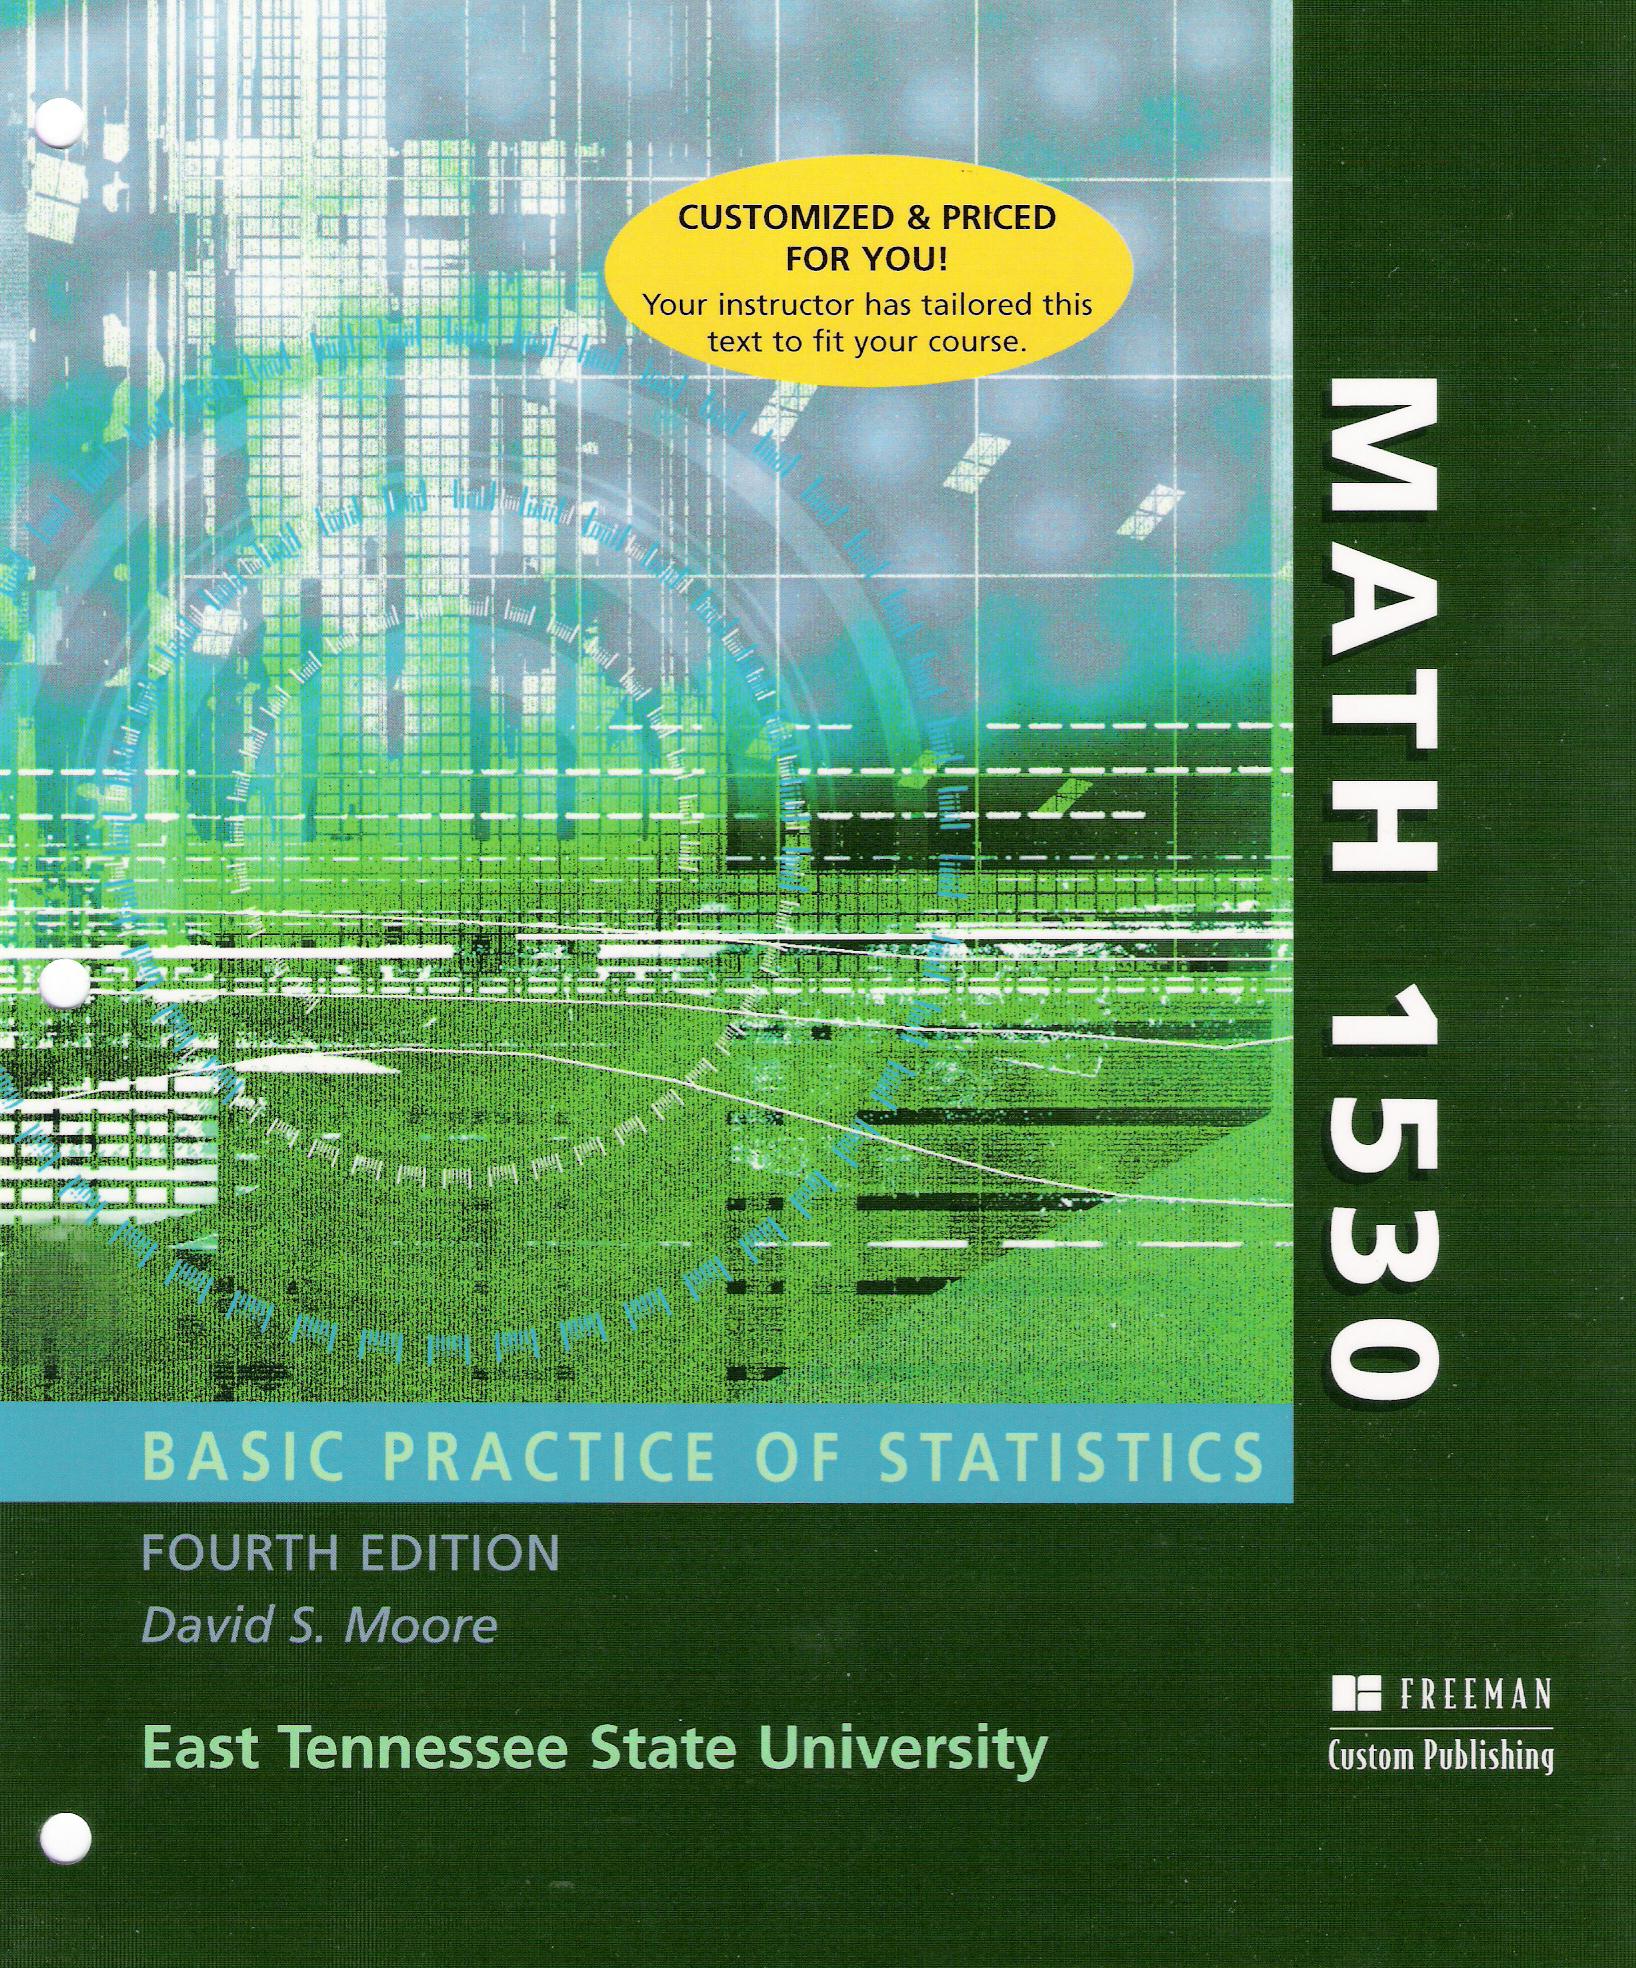 The basic practice of statistics 5th edition solutions manual